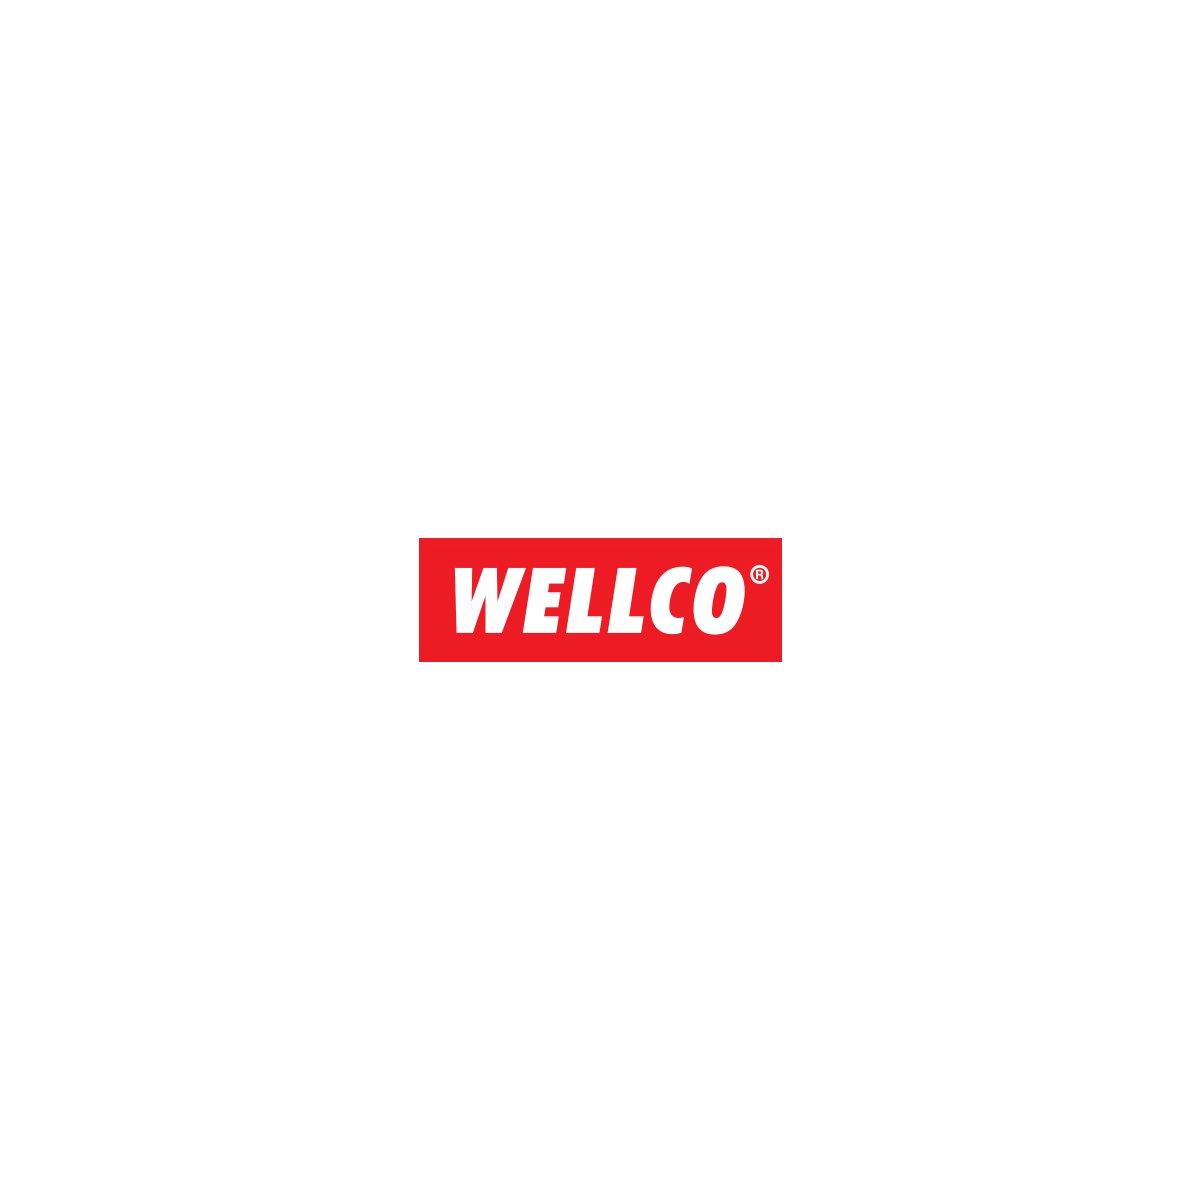 Where to Buy Wellco Products